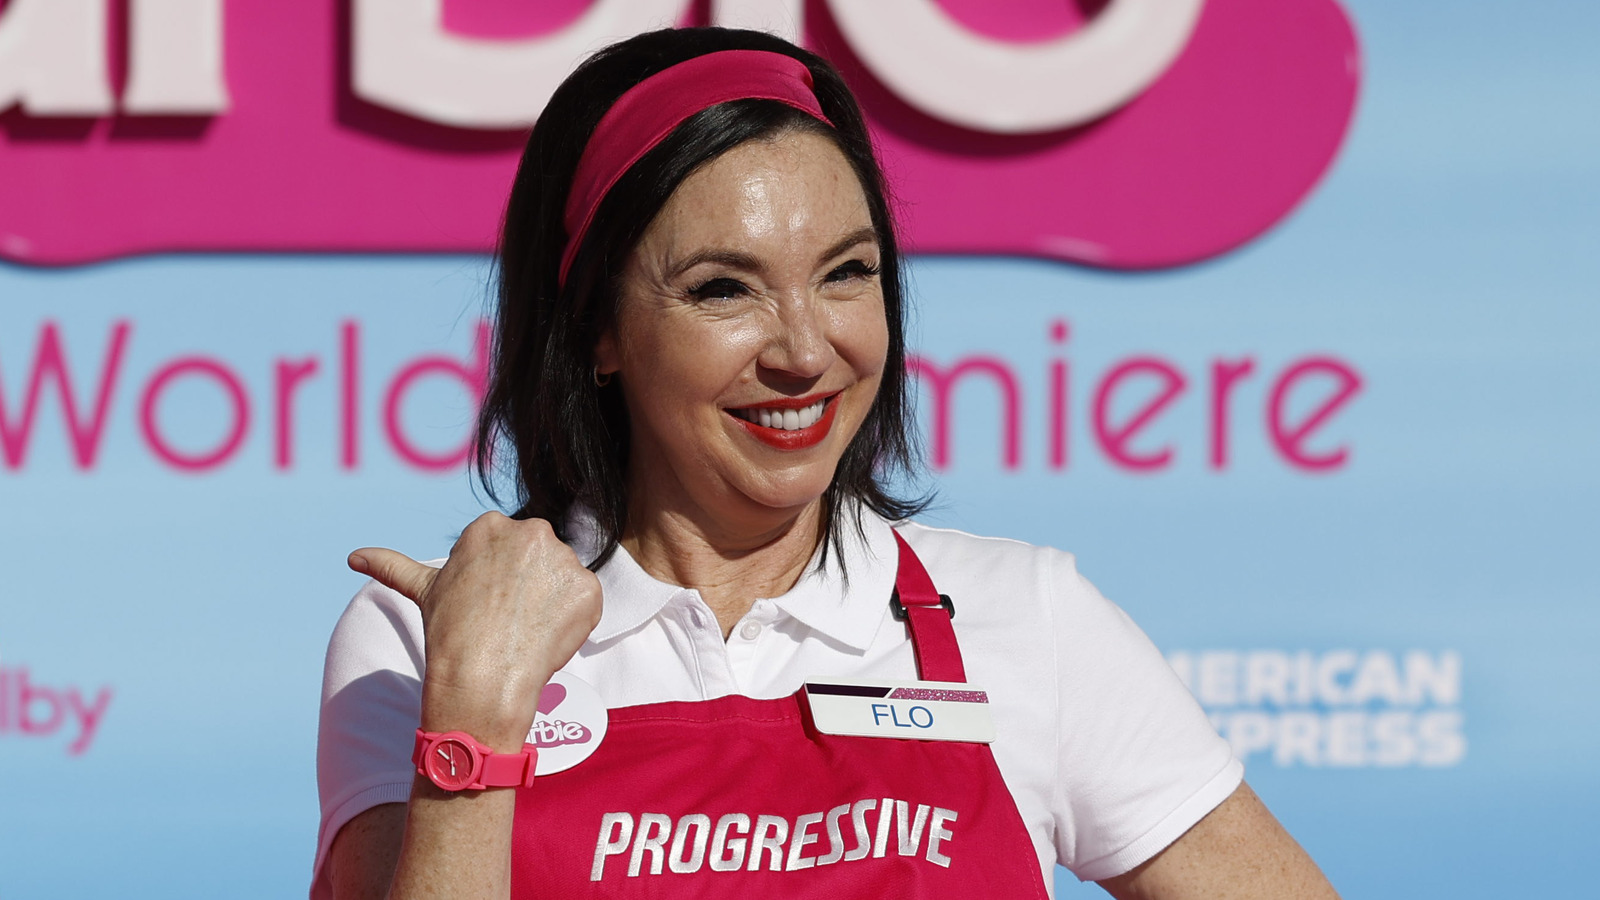 What Flo from the Progressive Commercials Looks Like in Real Life